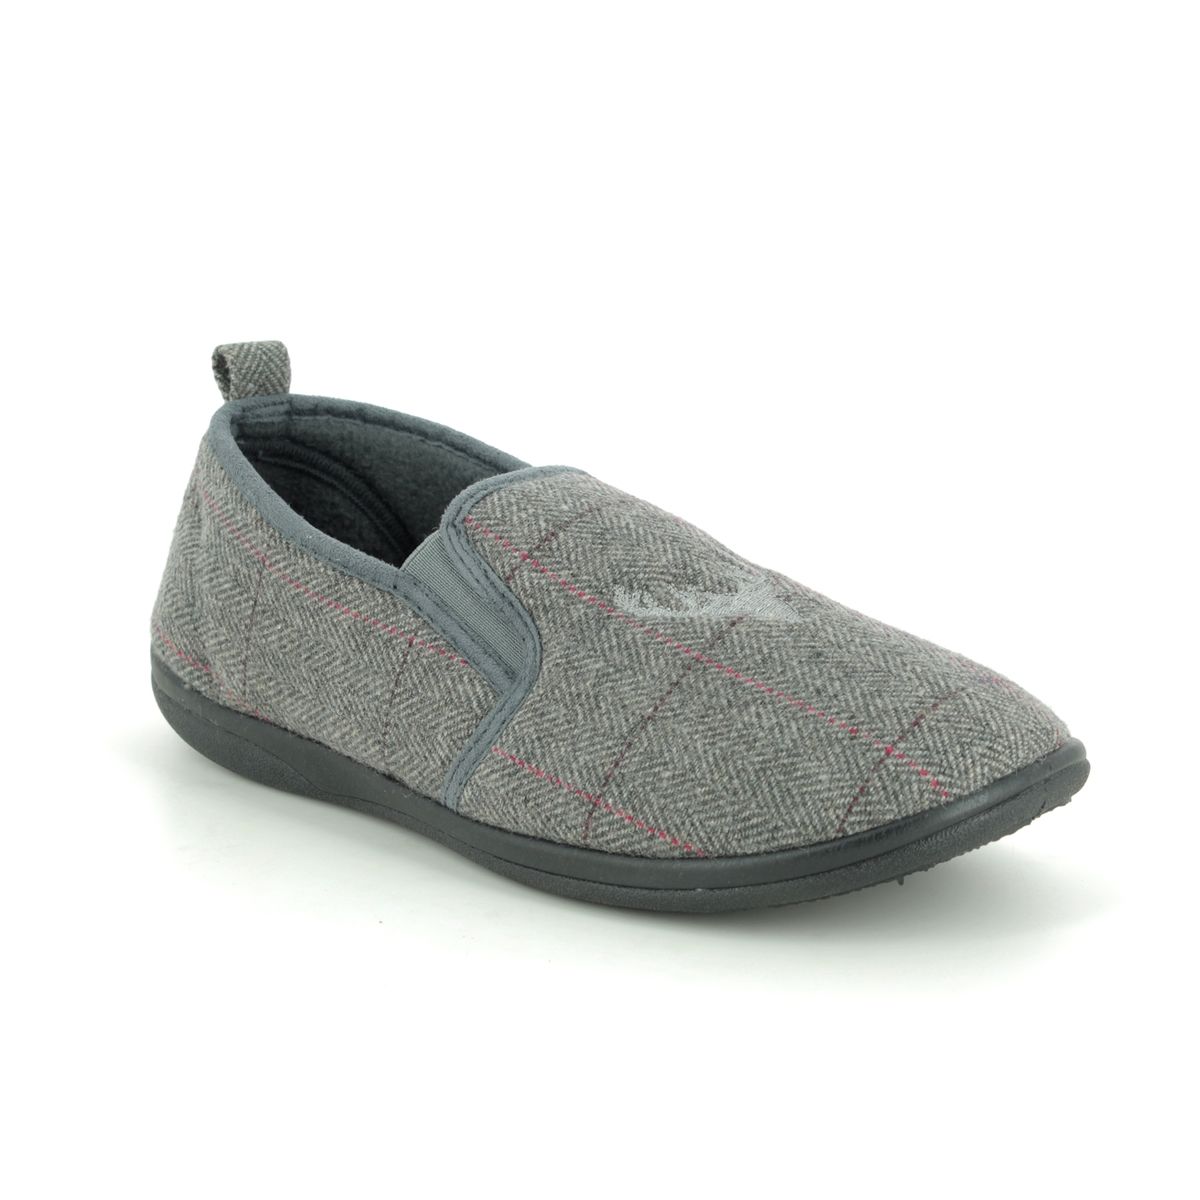 Padders Huntsman G Fit Grey Mens slippers 489-97 in a Tartan Textile in Size 12